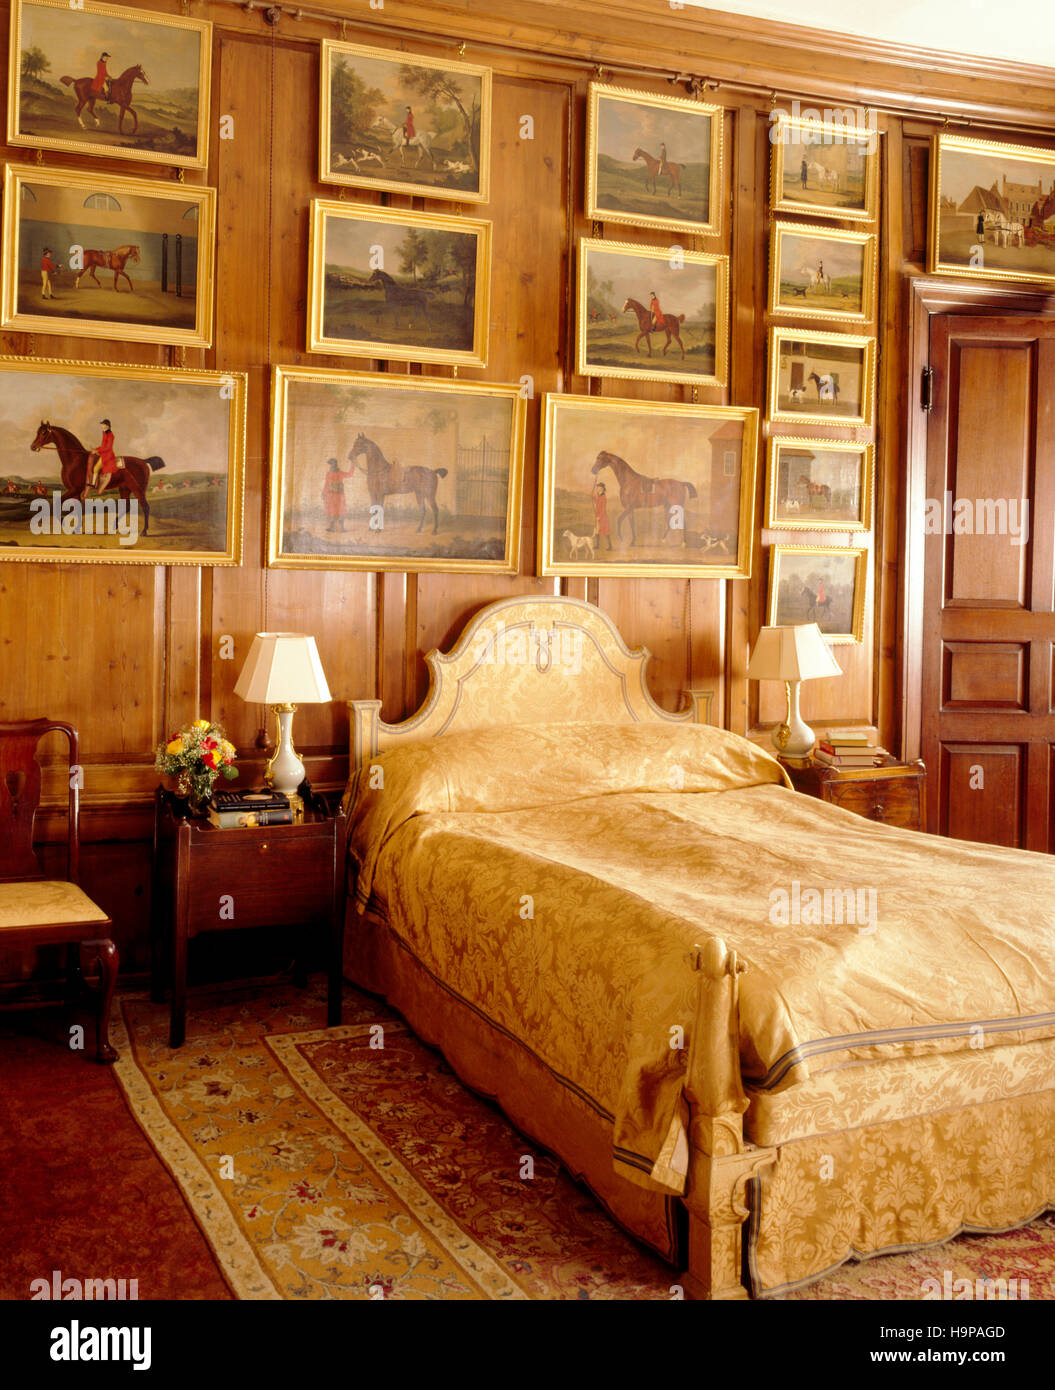 Room view of the Porch bedroom at Antony House showing the bed and a collection of C18th & 19th horse paintings. Stock Photo